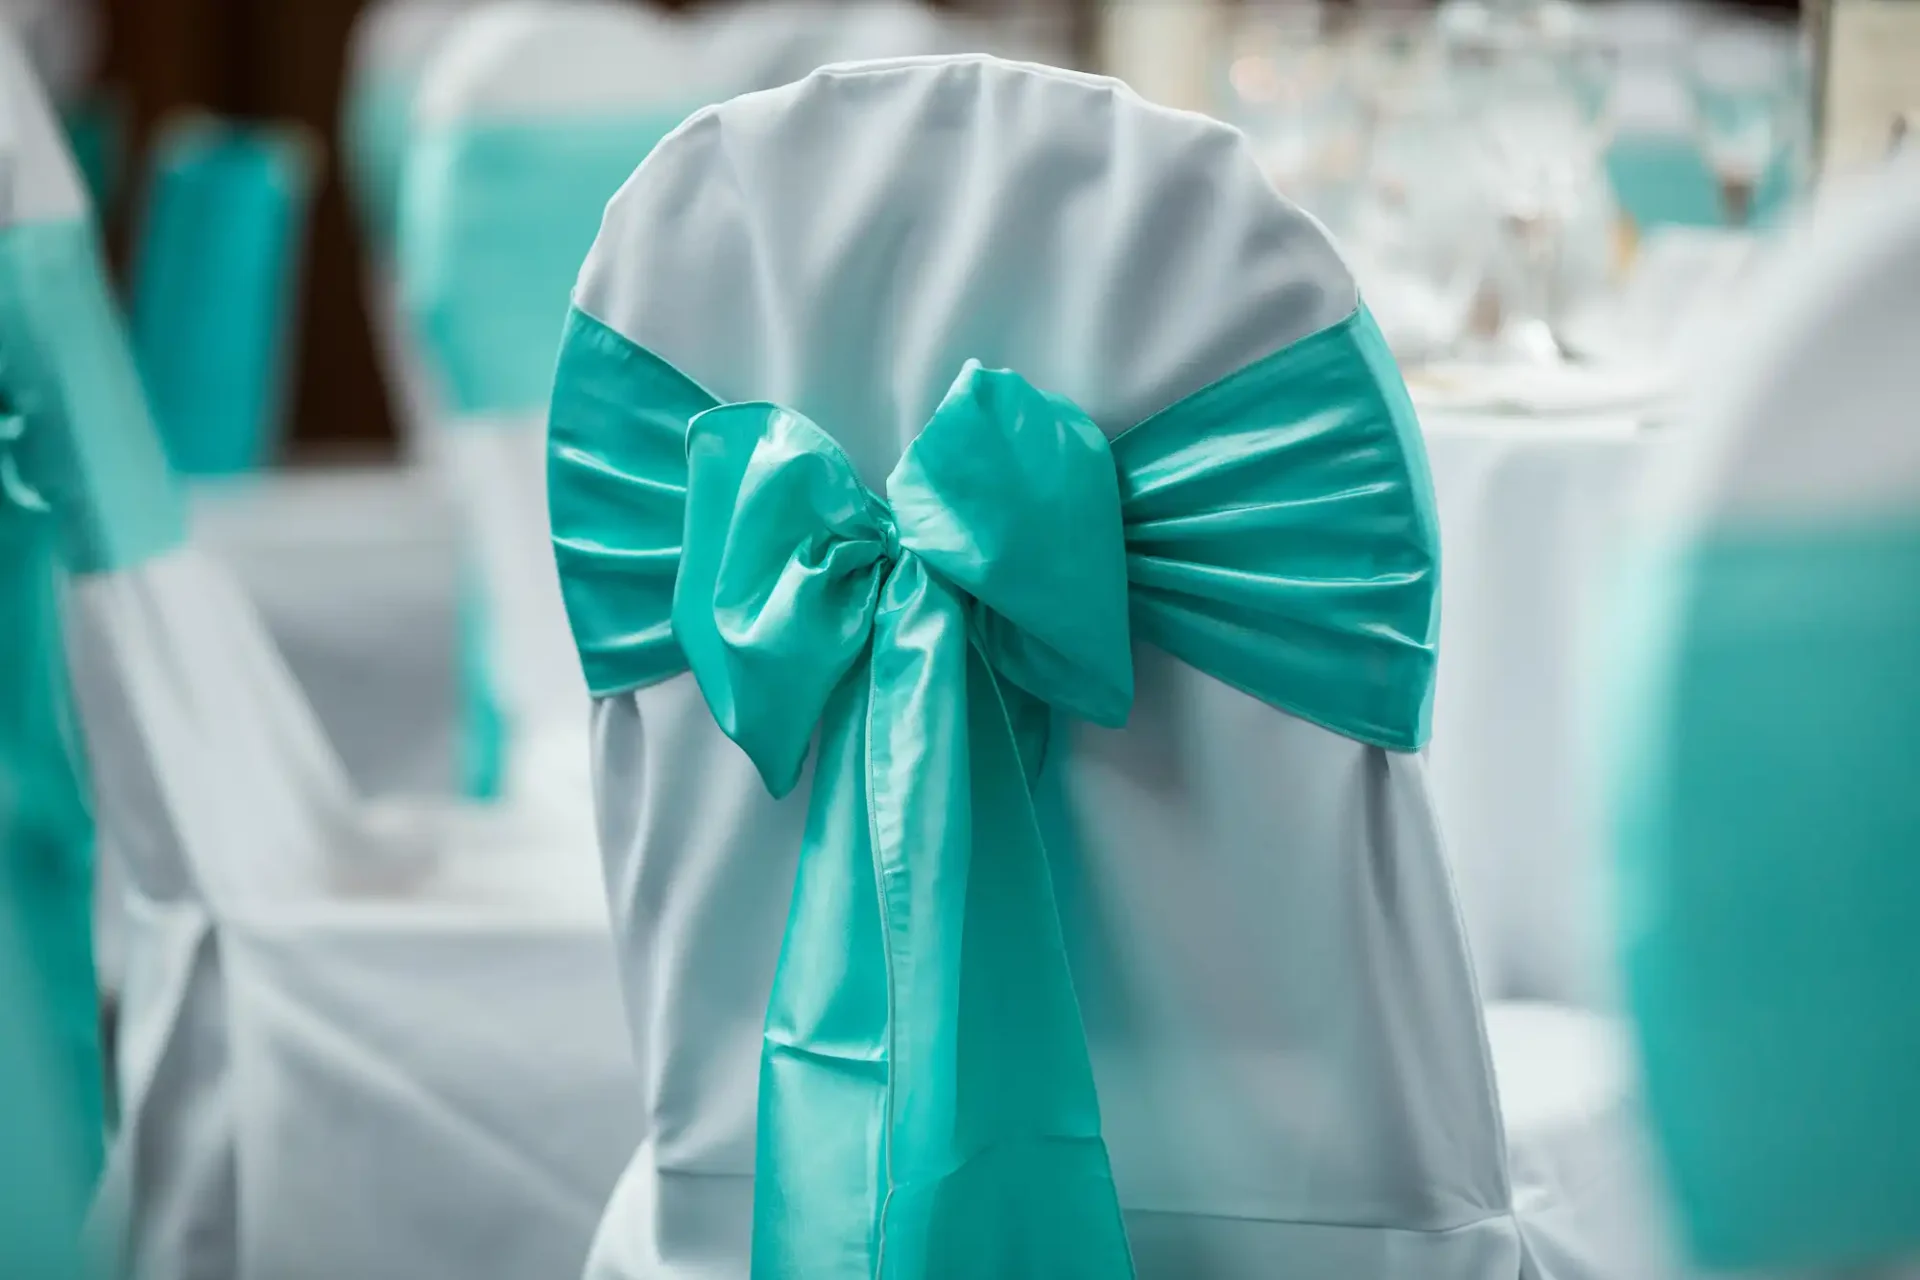 Elegant white chair with a teal satin sash tied in a bow, set up at a decorated event venue with more similarly adorned chairs and tables in the background.